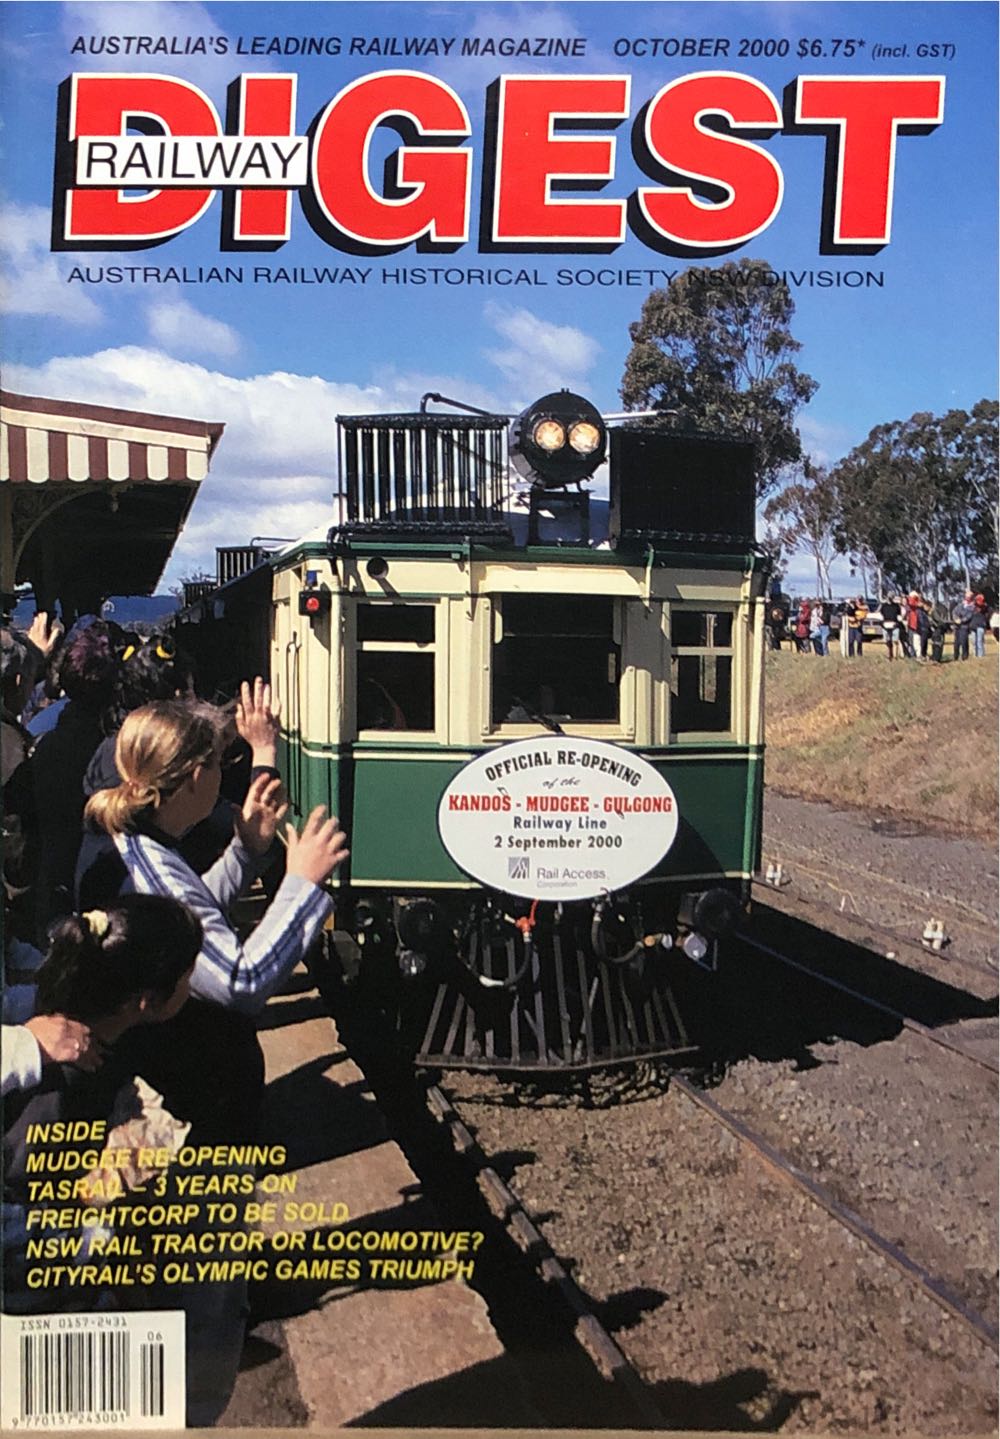 Railway Digest  (October) magazine collectible - Main Image 1